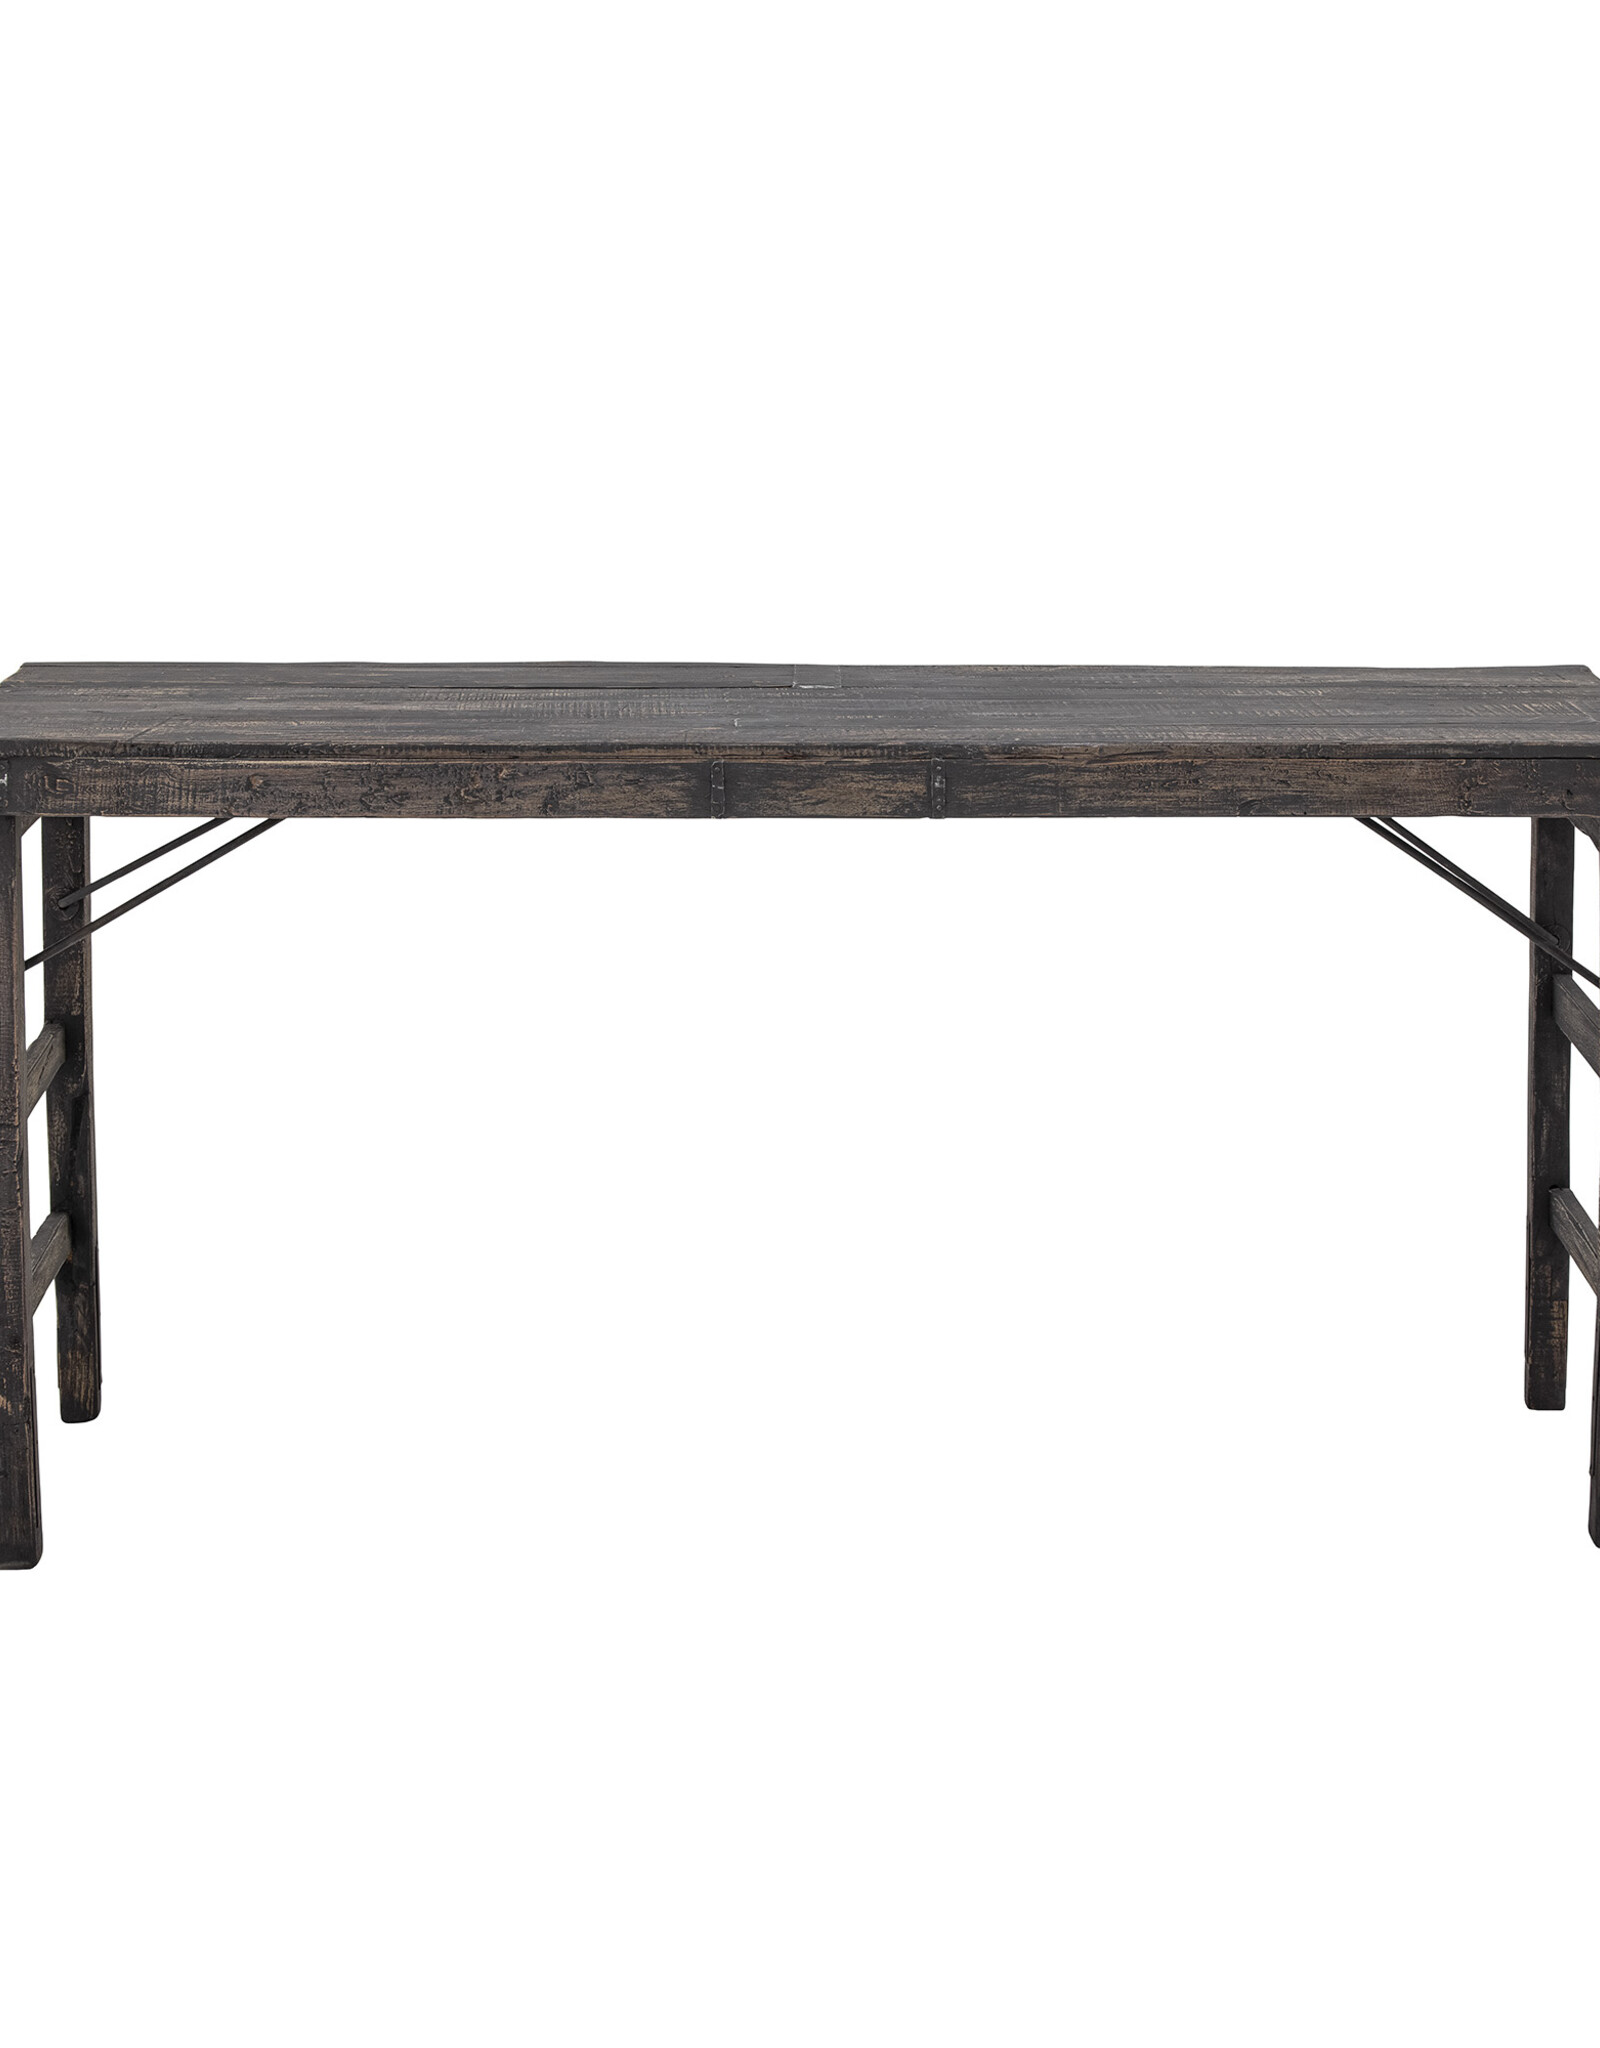 Creative Collection markttafel 'Cali' - recycled hout